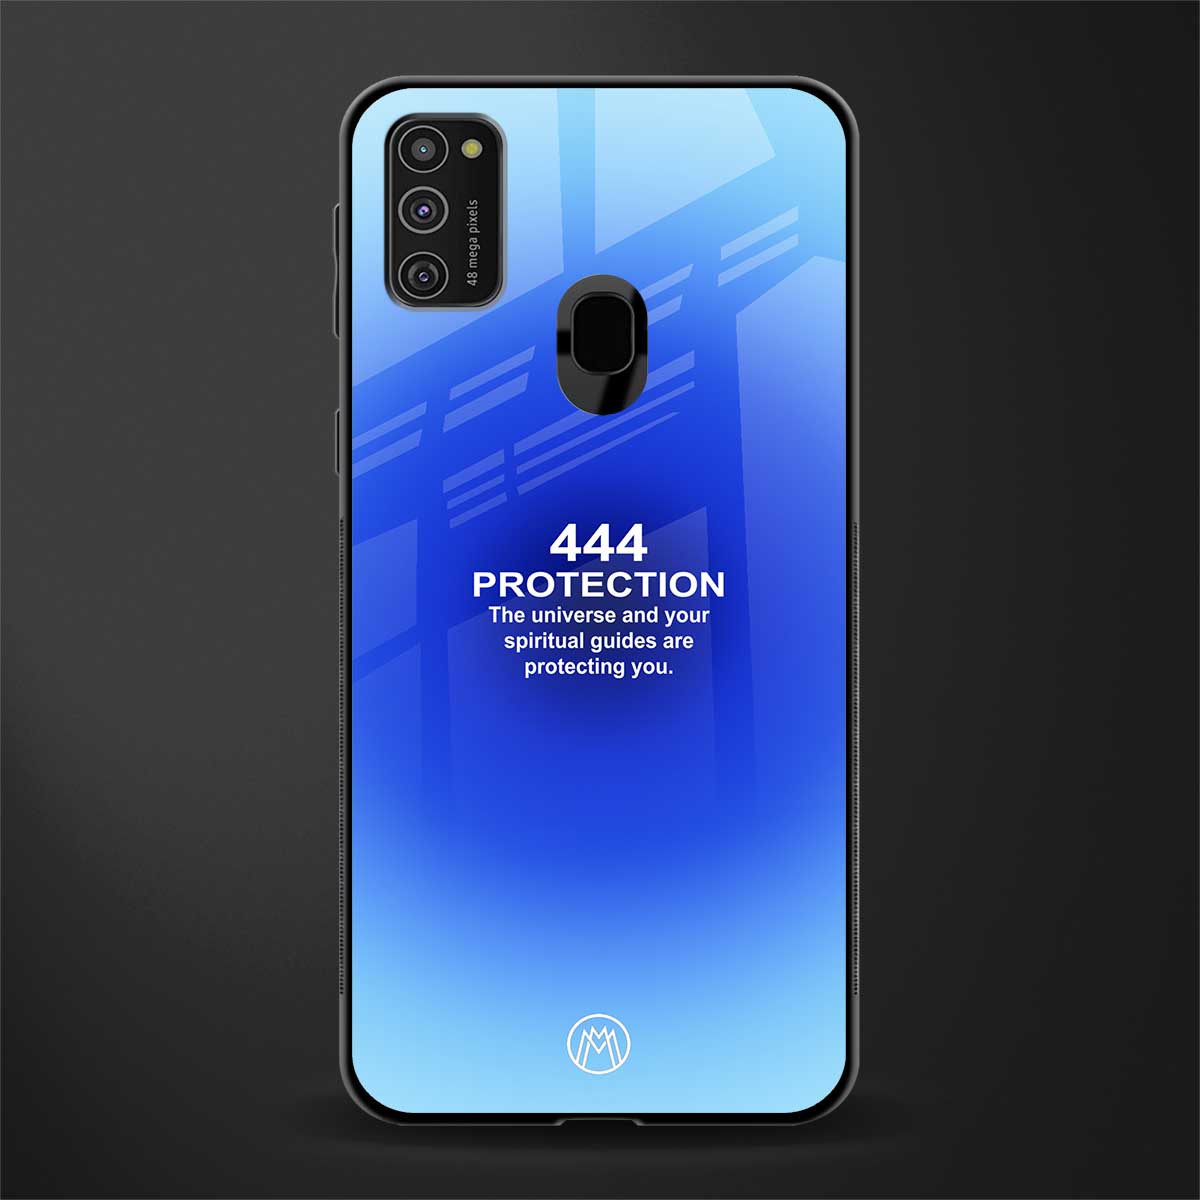 444 protection glass case for samsung galaxy m30s image